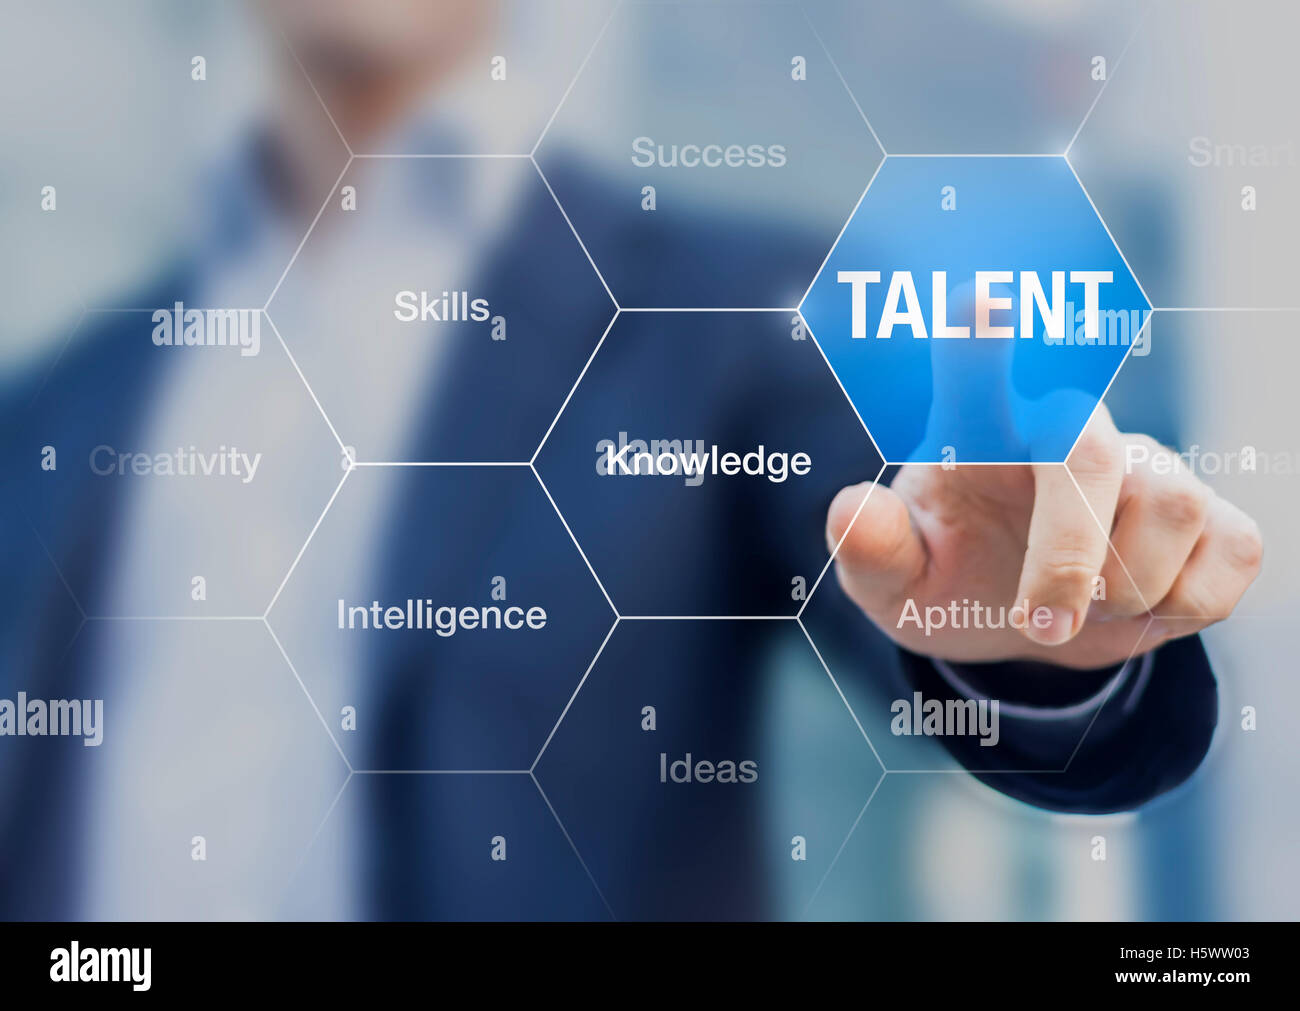 Concept about talent, performance based on outstanding intelligence and knowledge Stock Photo